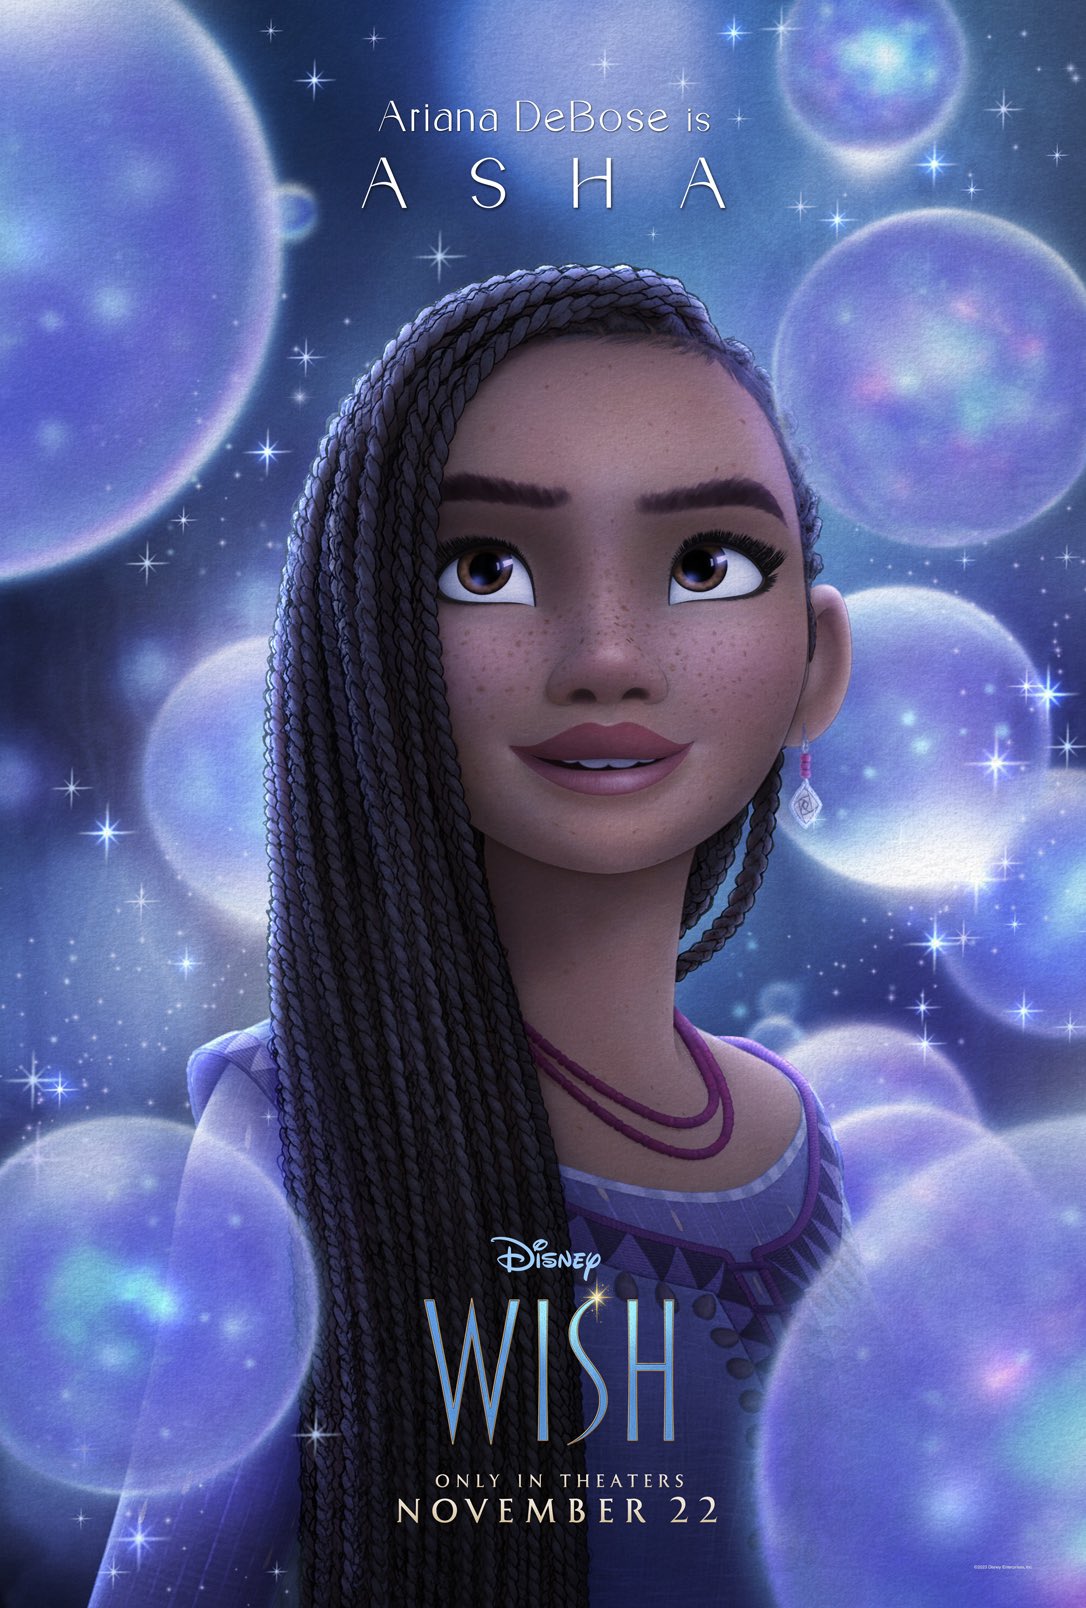 Disney's 'Wish' Imagines a Magical Realm in New Trailer, Images